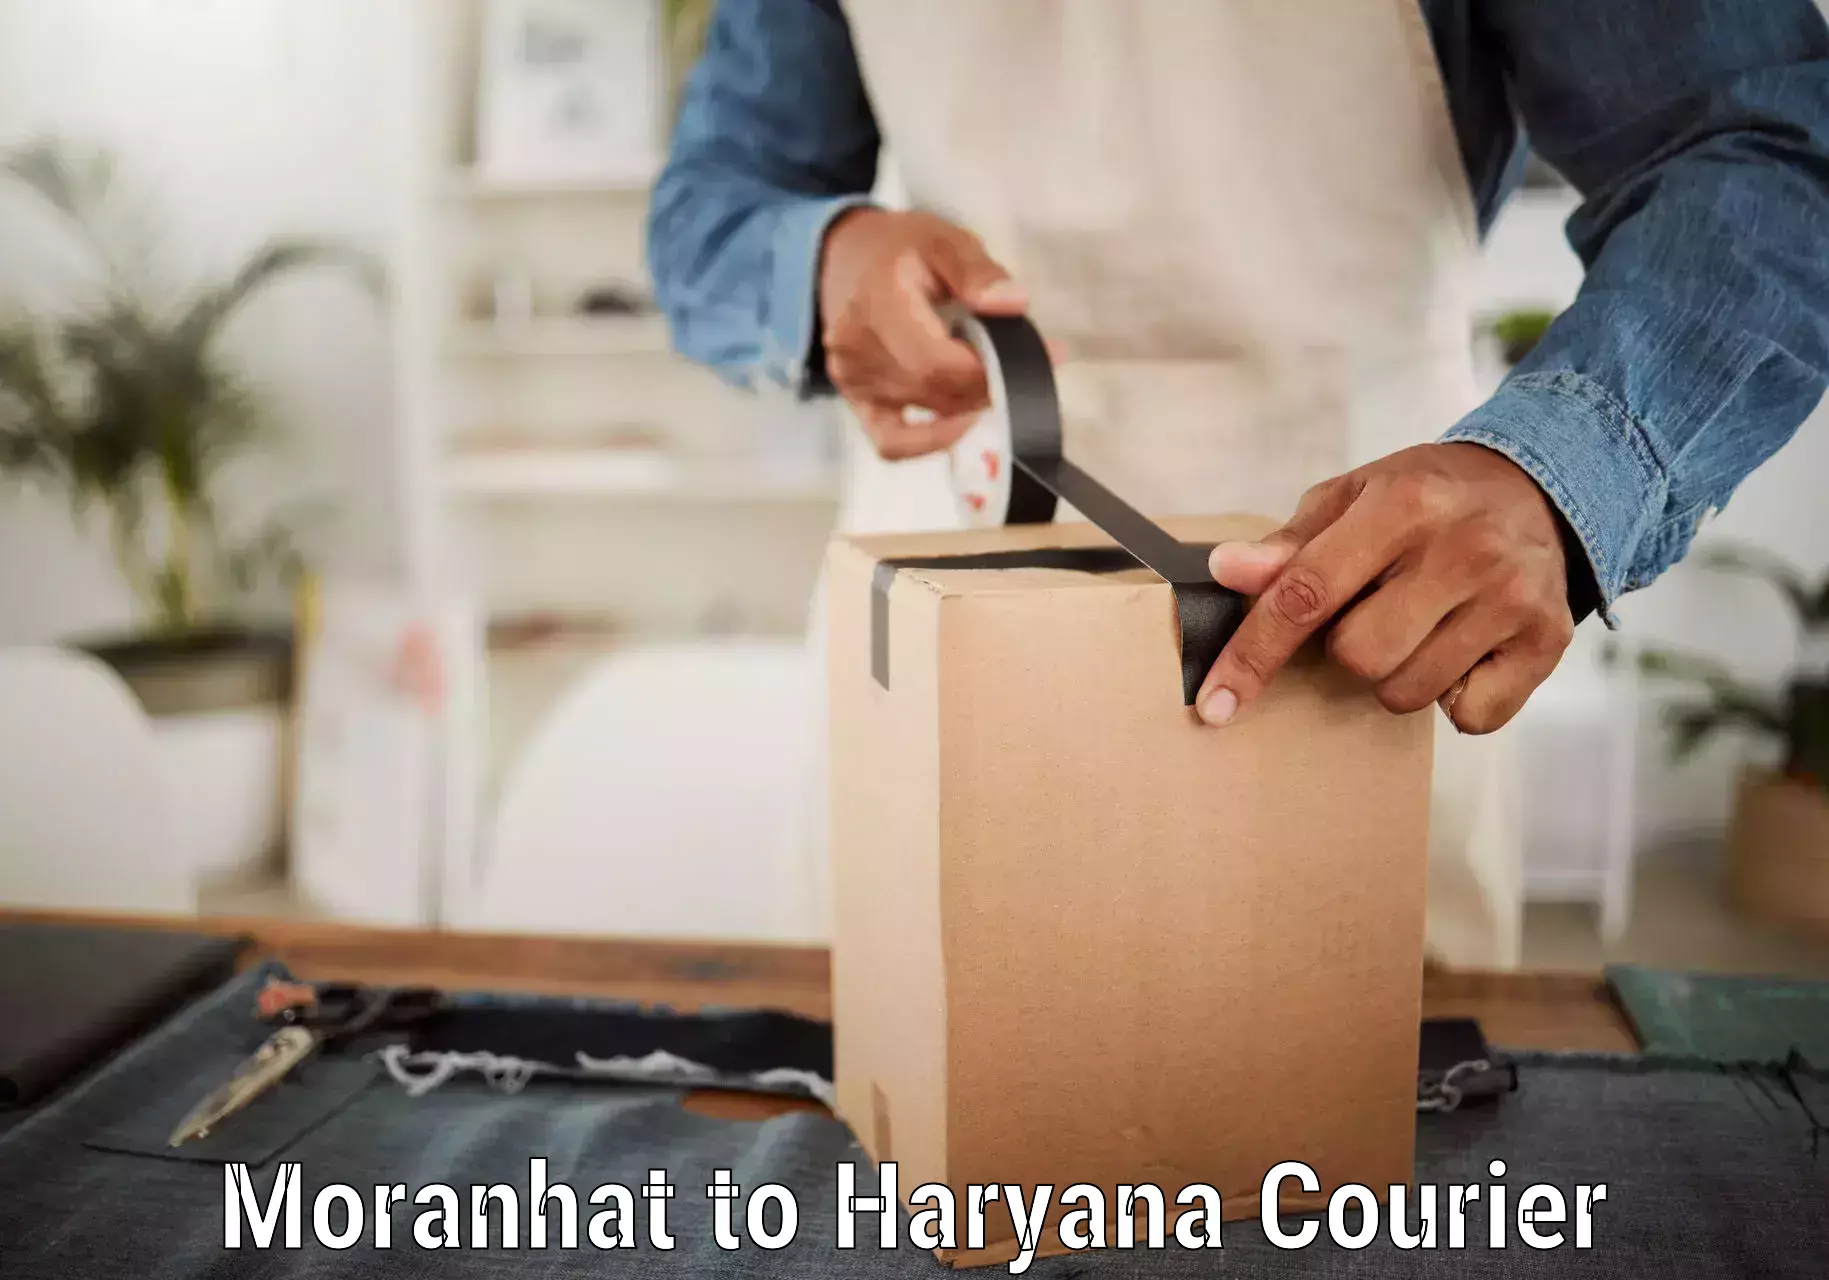 Courier service comparison in Moranhat to Haryana